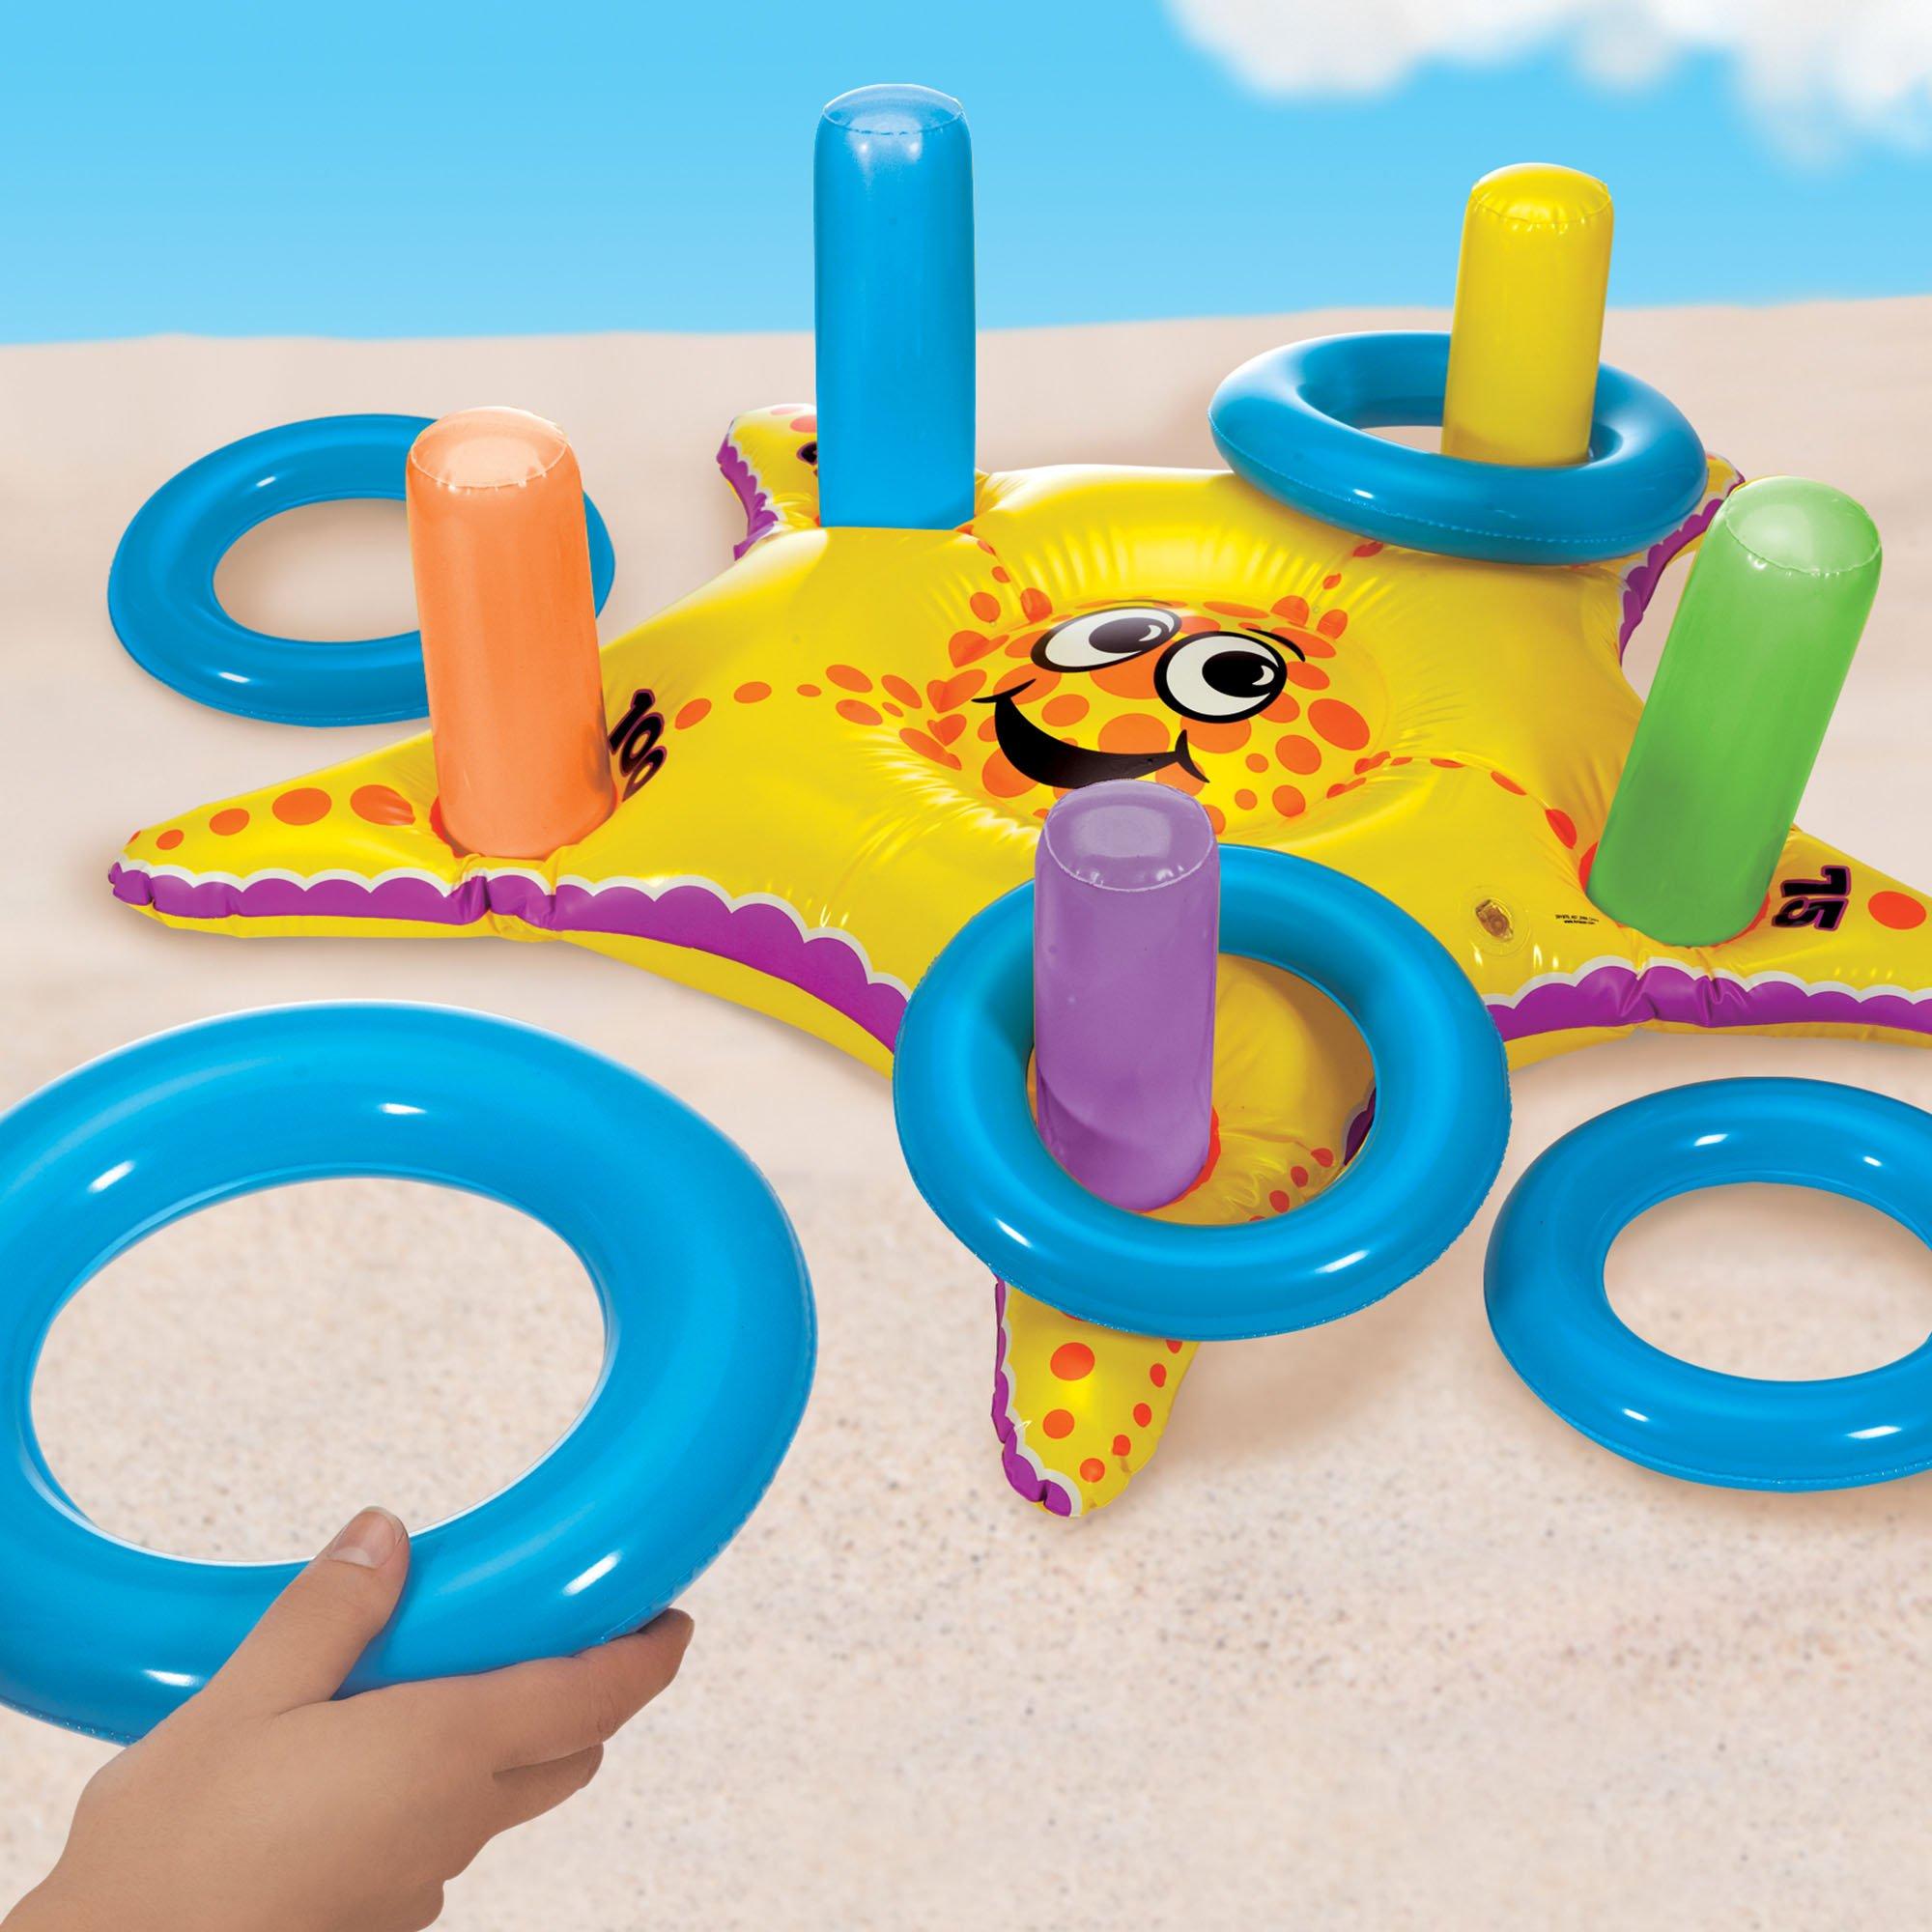 Add Fun to the Party with This Ring Toss Game - Between Carpools